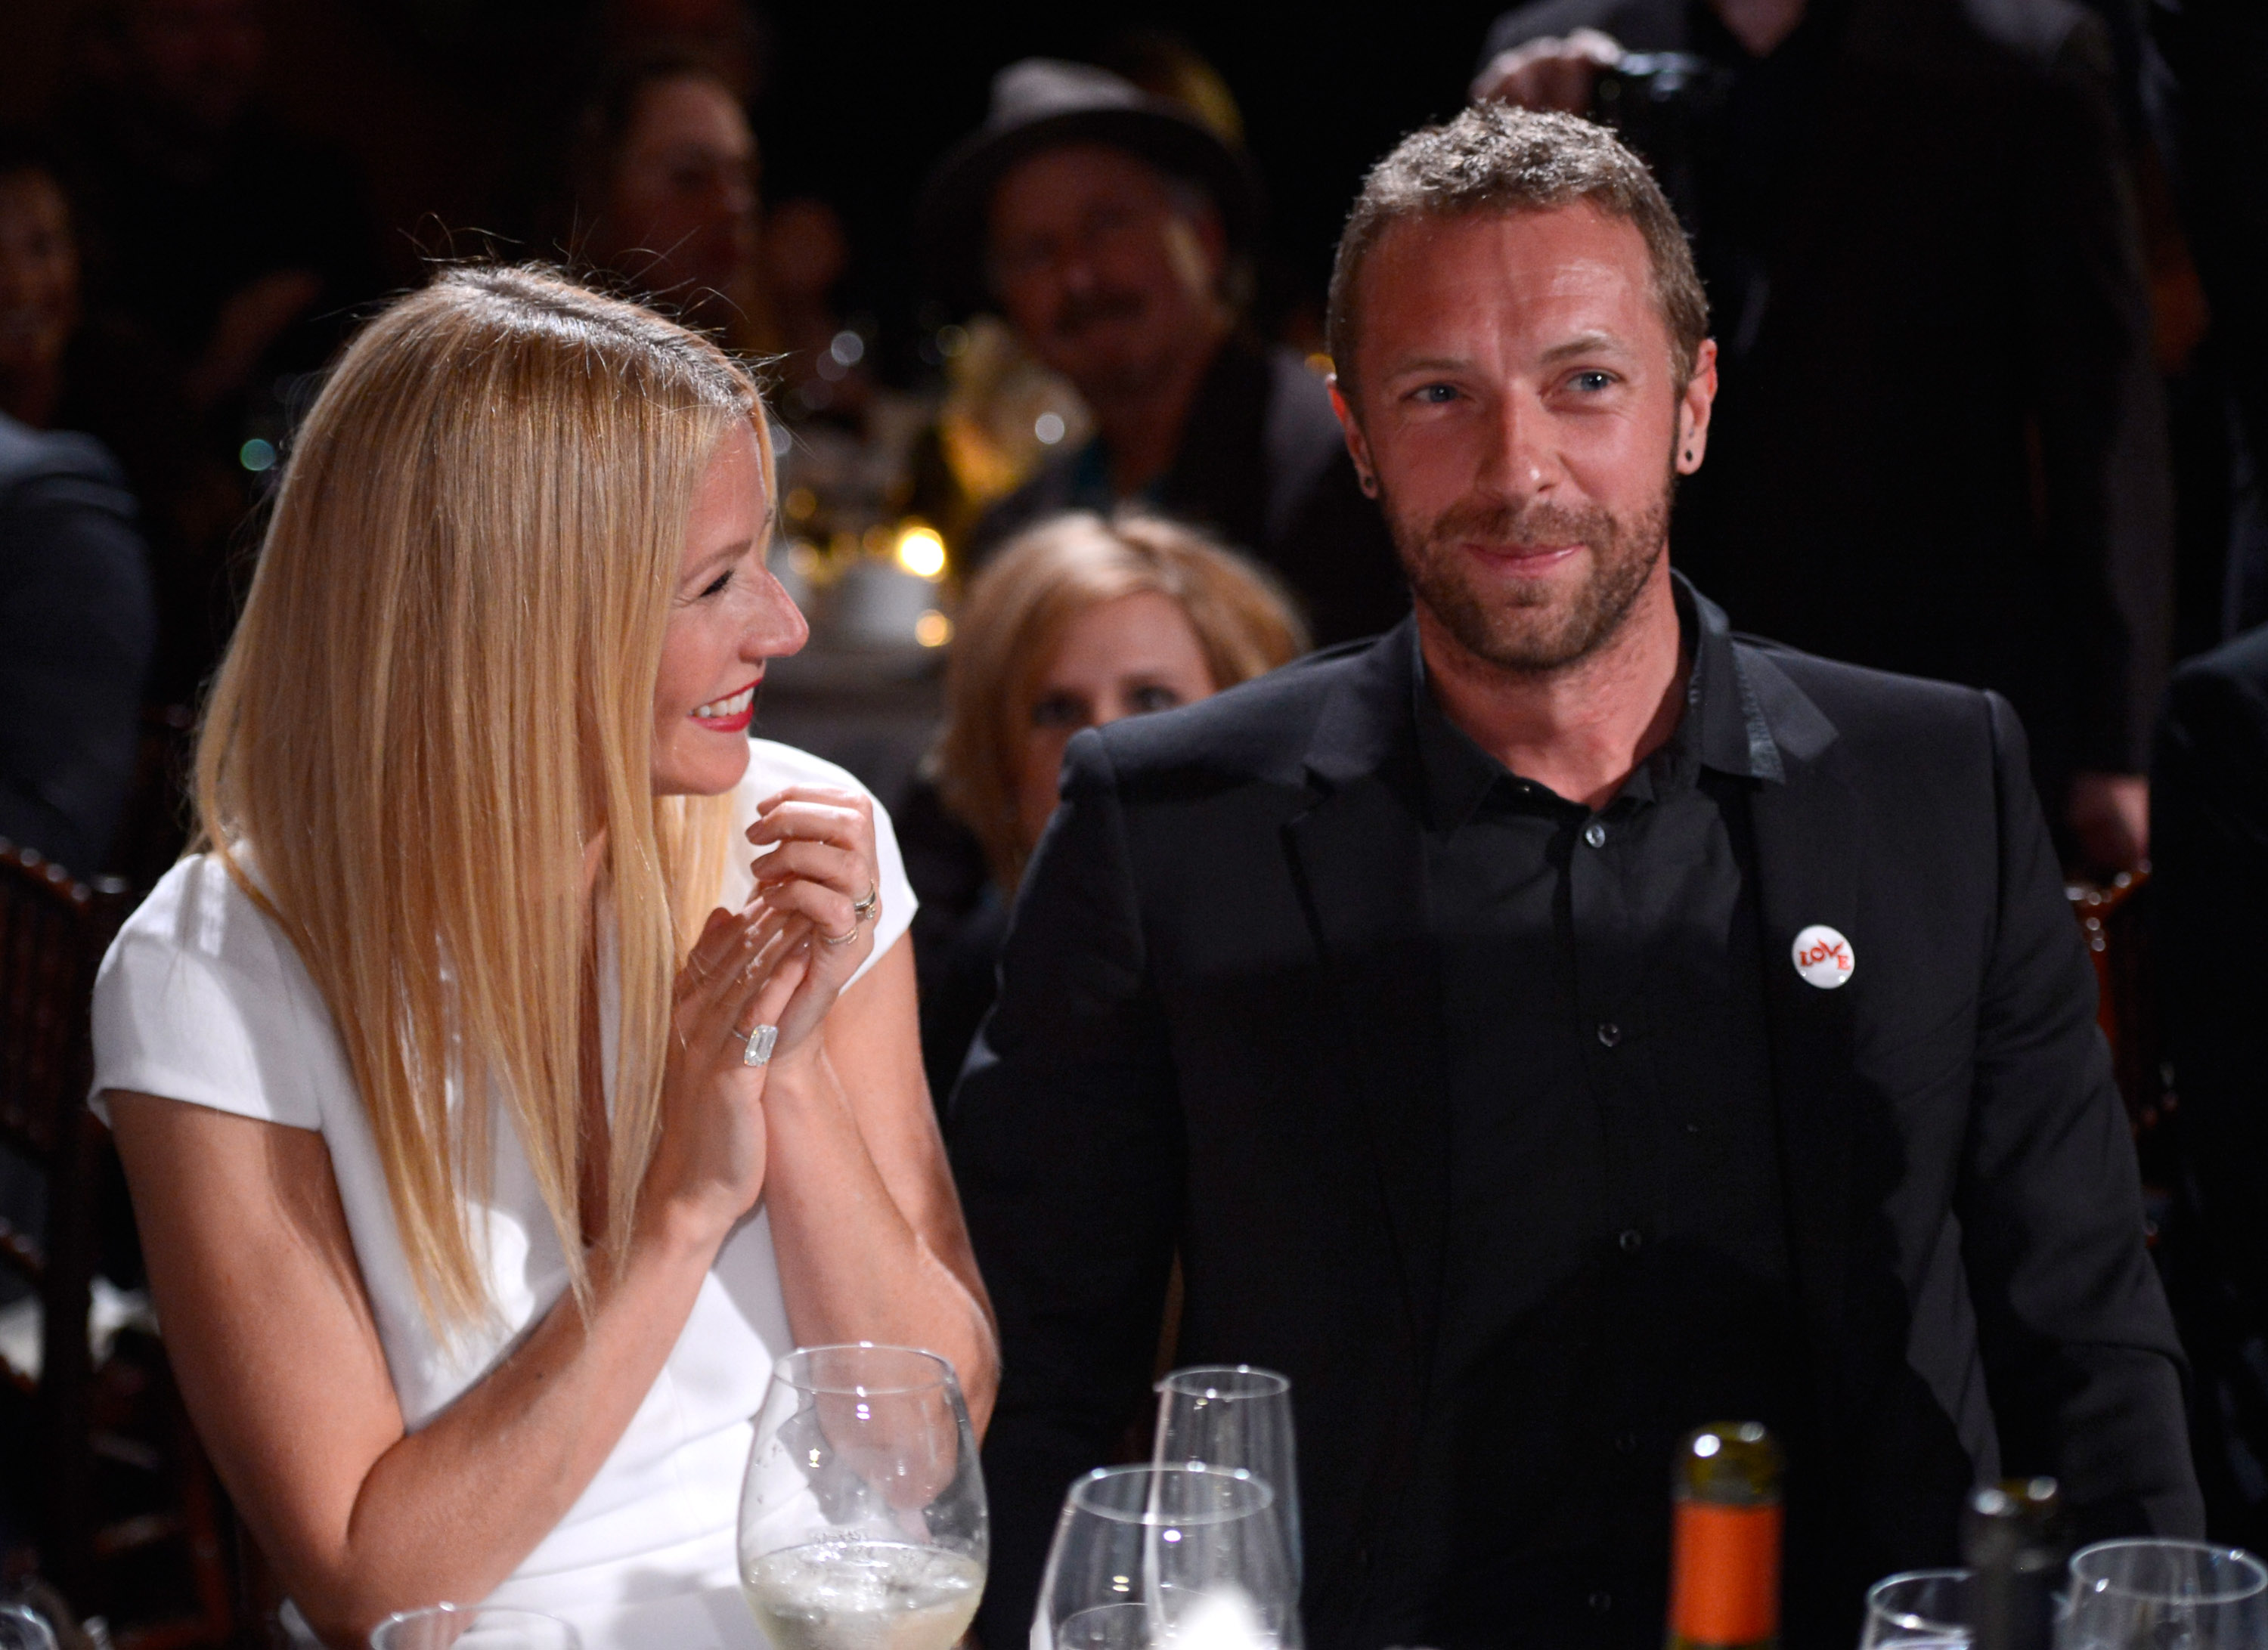 Gwyneth Paltrow and Chris Martin at Montage Beverly Hills on January 11, 2014 in Beverly Hills, California. (Kevin Mazur—Getty Images)